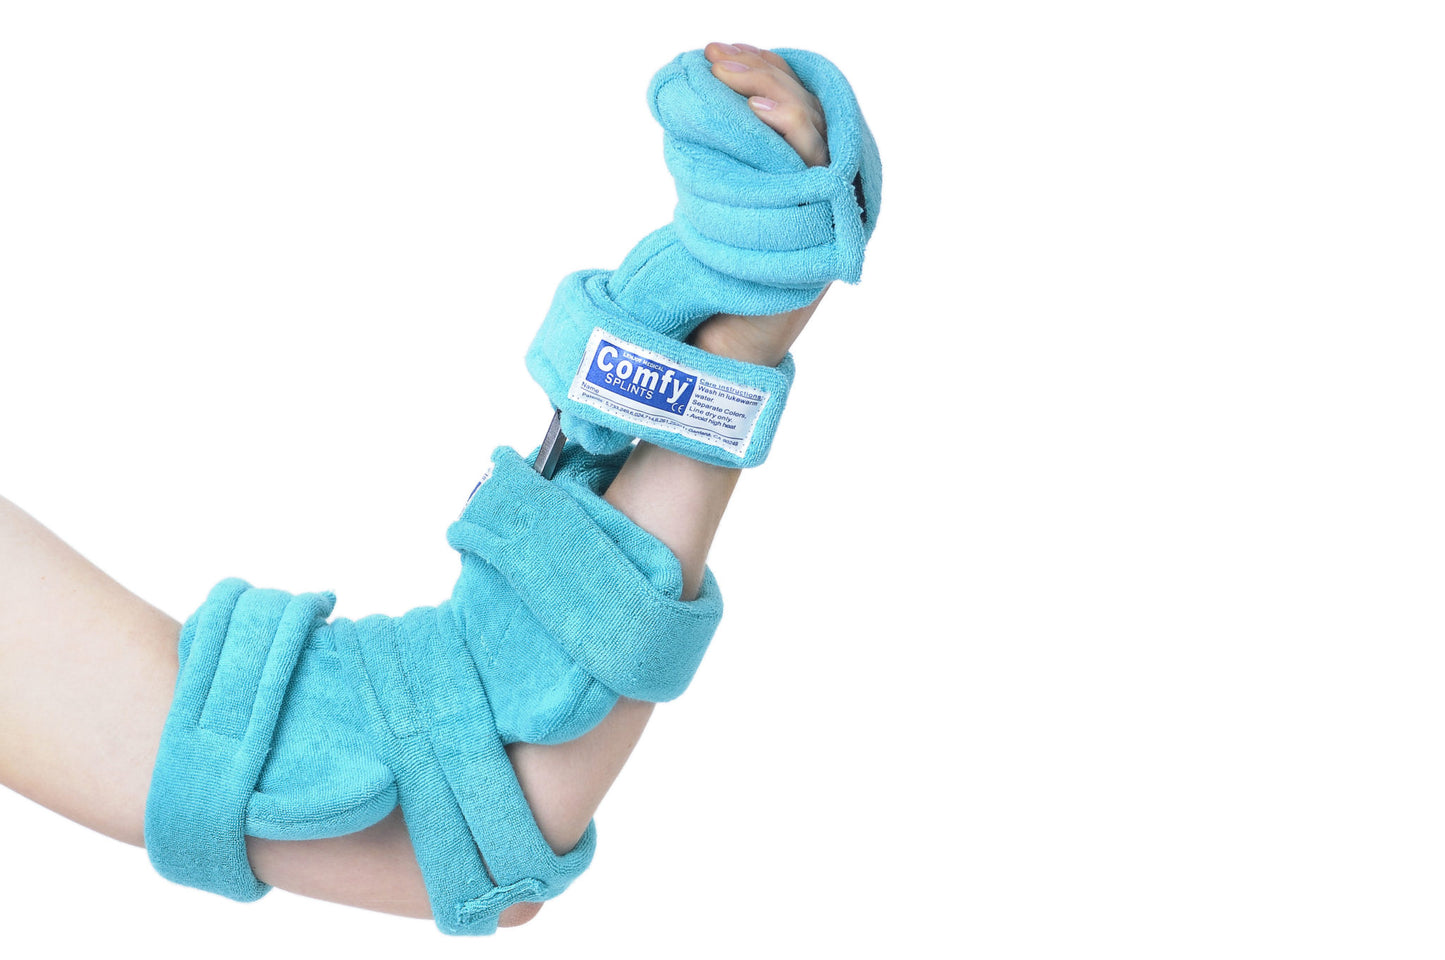 Adult Terry Cloth Spring Loaded Goniometer Elbow Splint